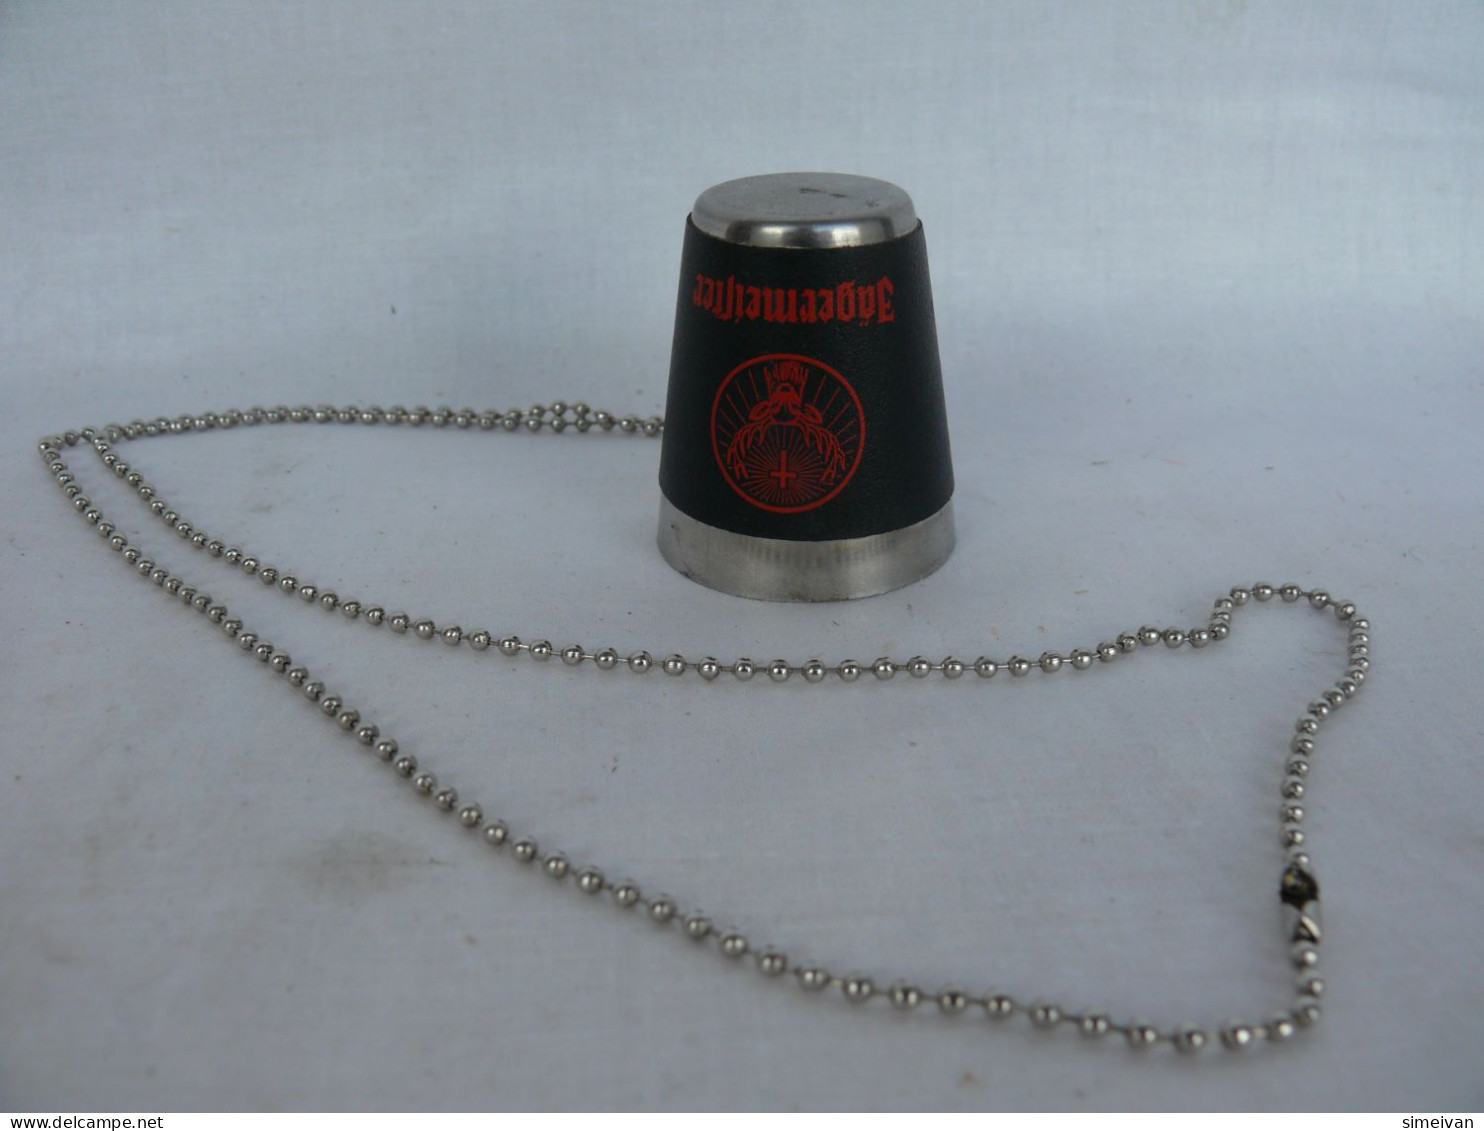 Interesting Jägermeister Small Cup Necklace #1503 - Cups